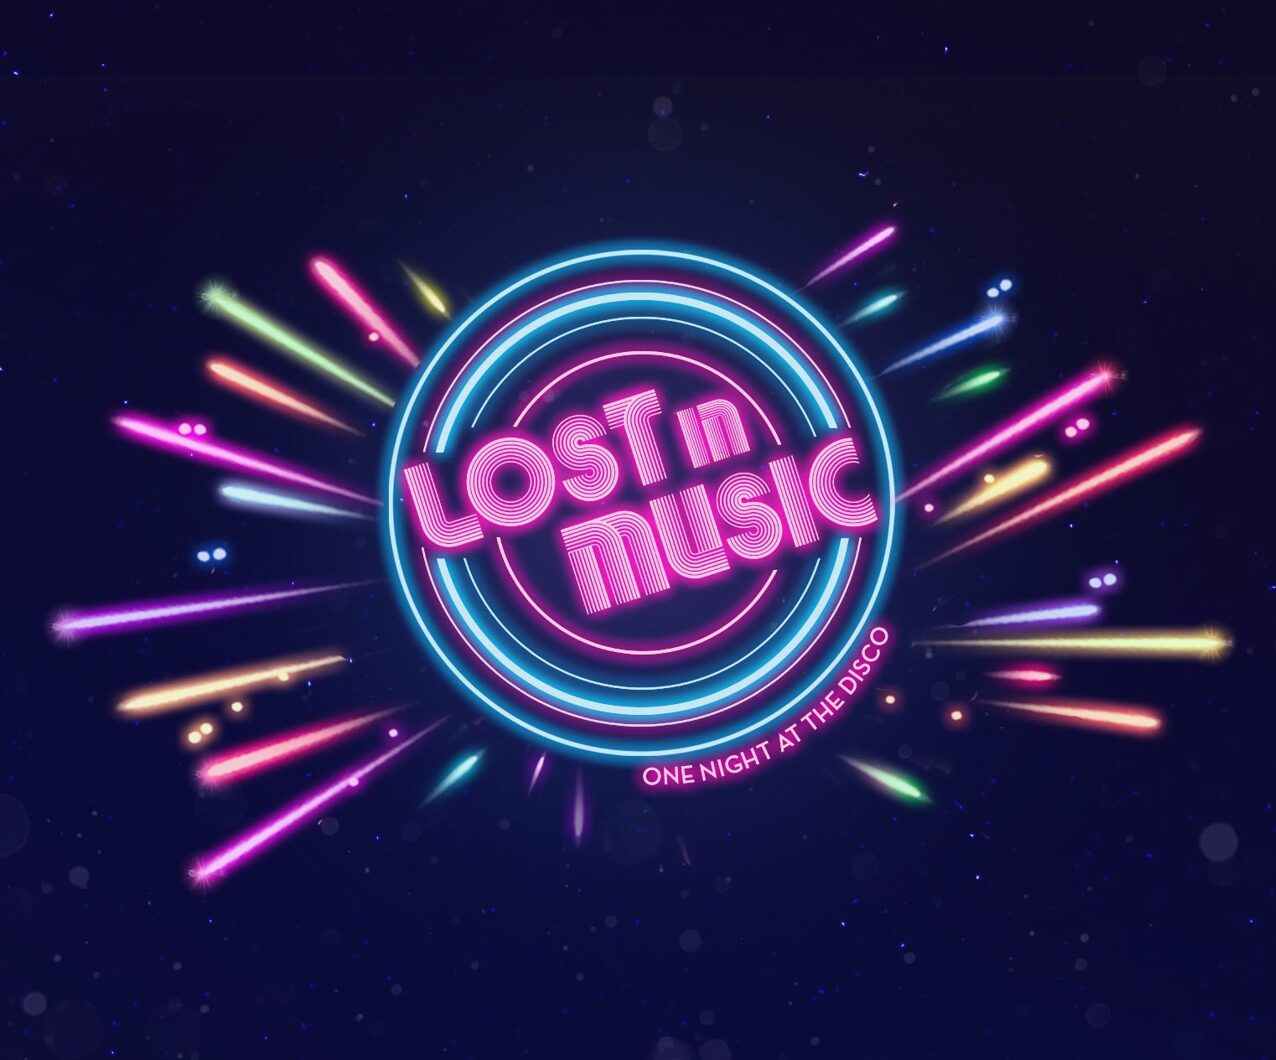 Lost in Music – One Night at the Disco